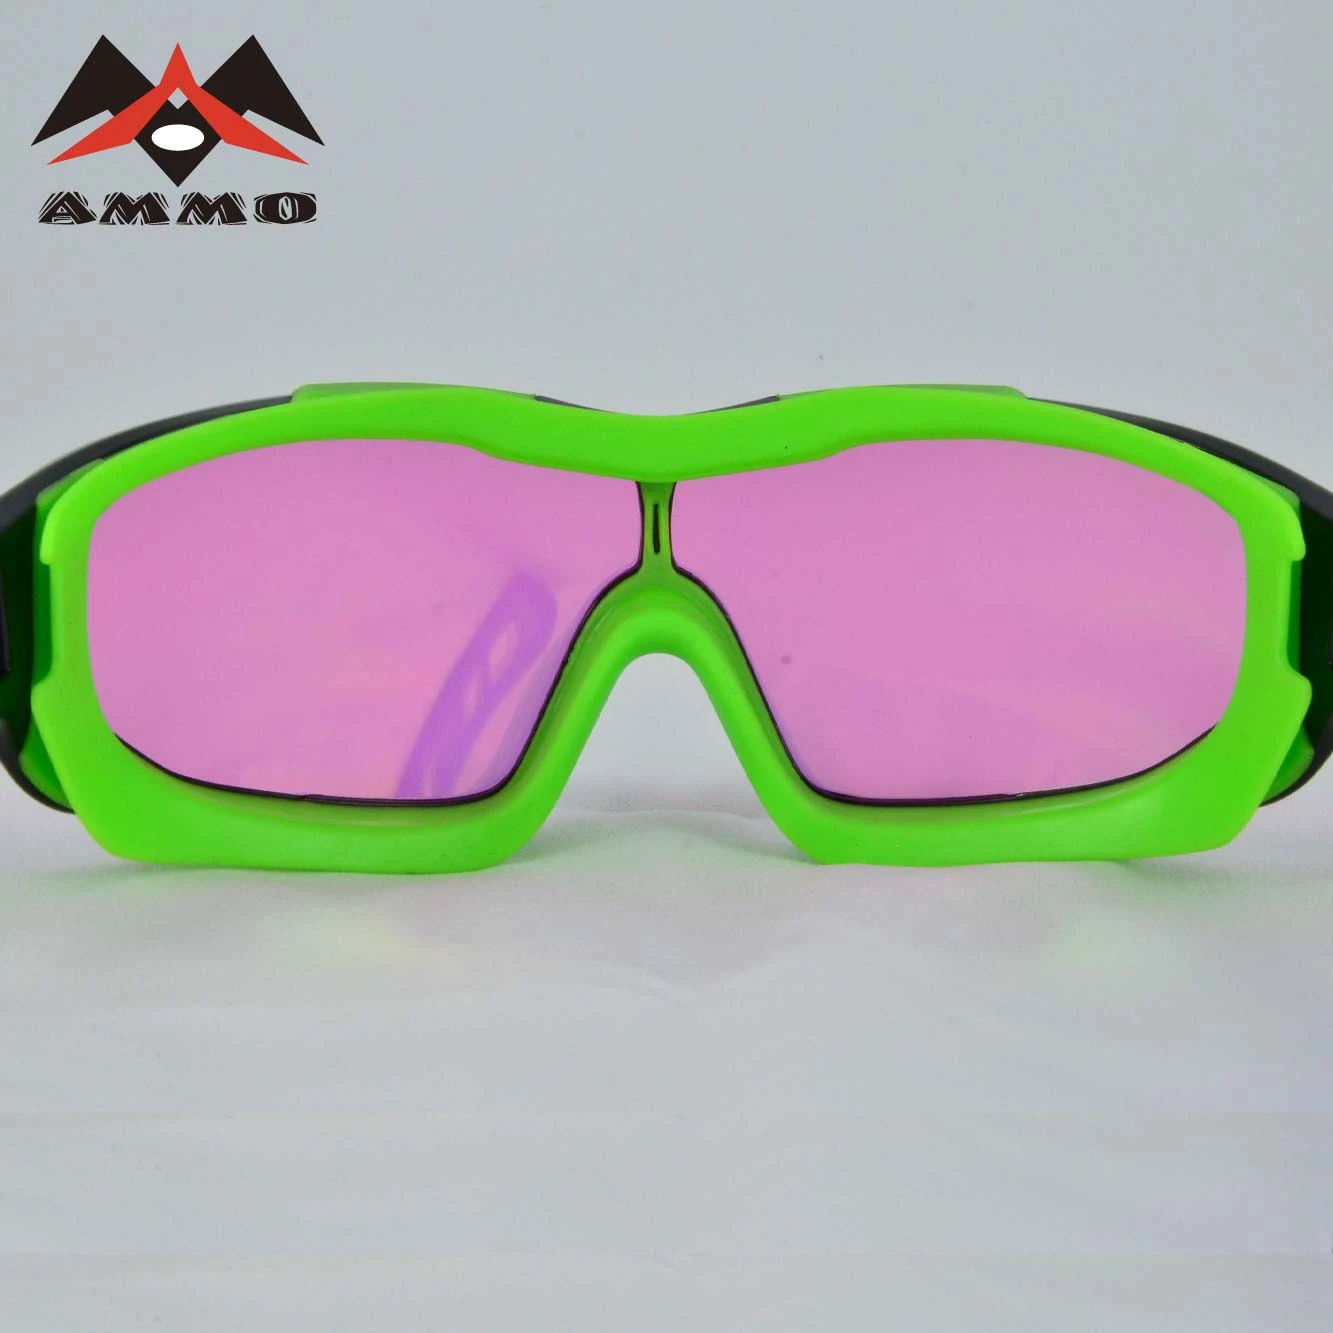 arm light weight clear lens replaceable sport safety glasses